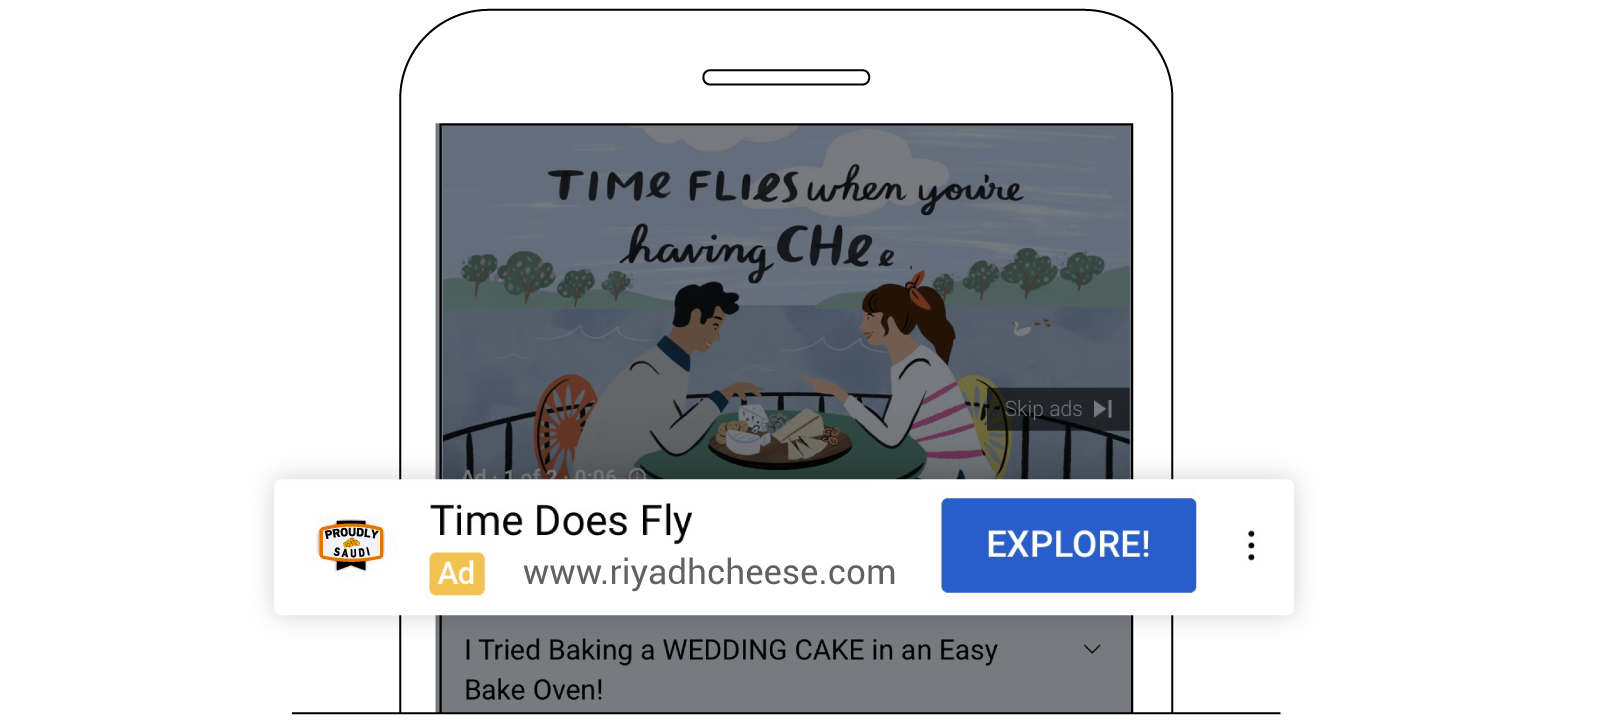 A digital ad shows a man and a woman at a restaurant table eating cheese, with the tagline 'time flies when you're having cheese', and a call to action encouraging people to explore the website.